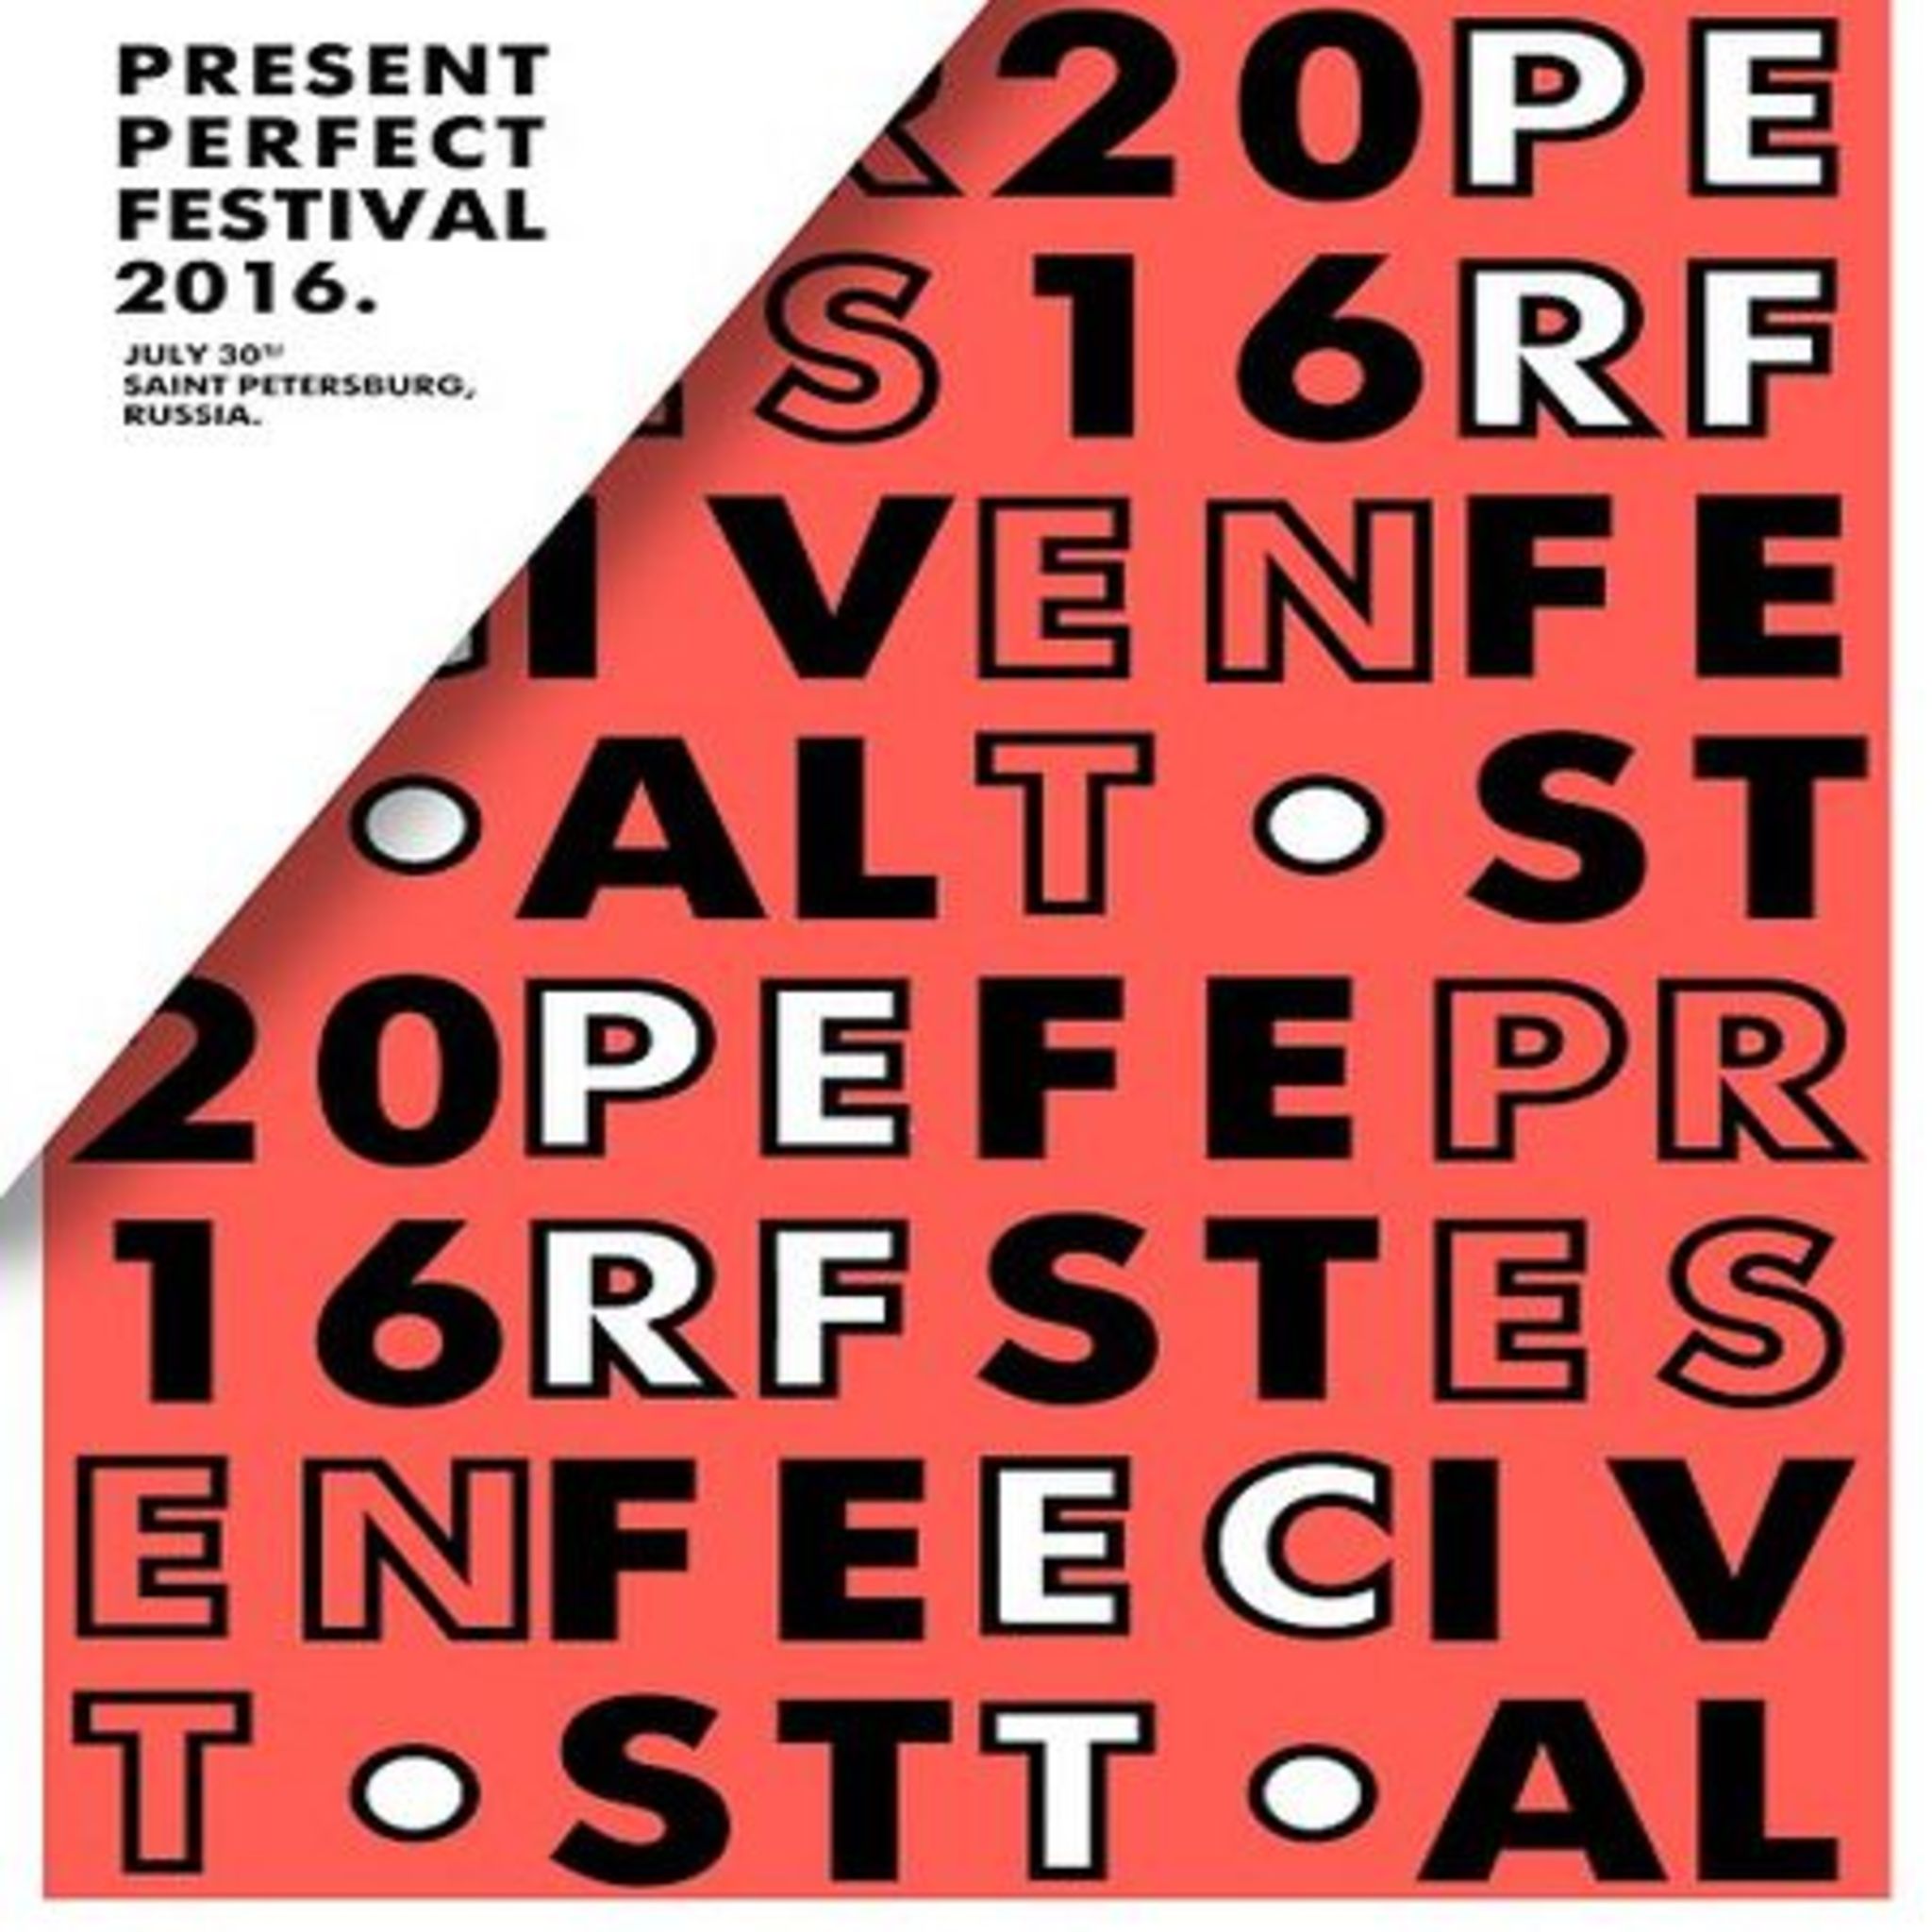 Present Perfect Festival 2016 in St. Petersburg